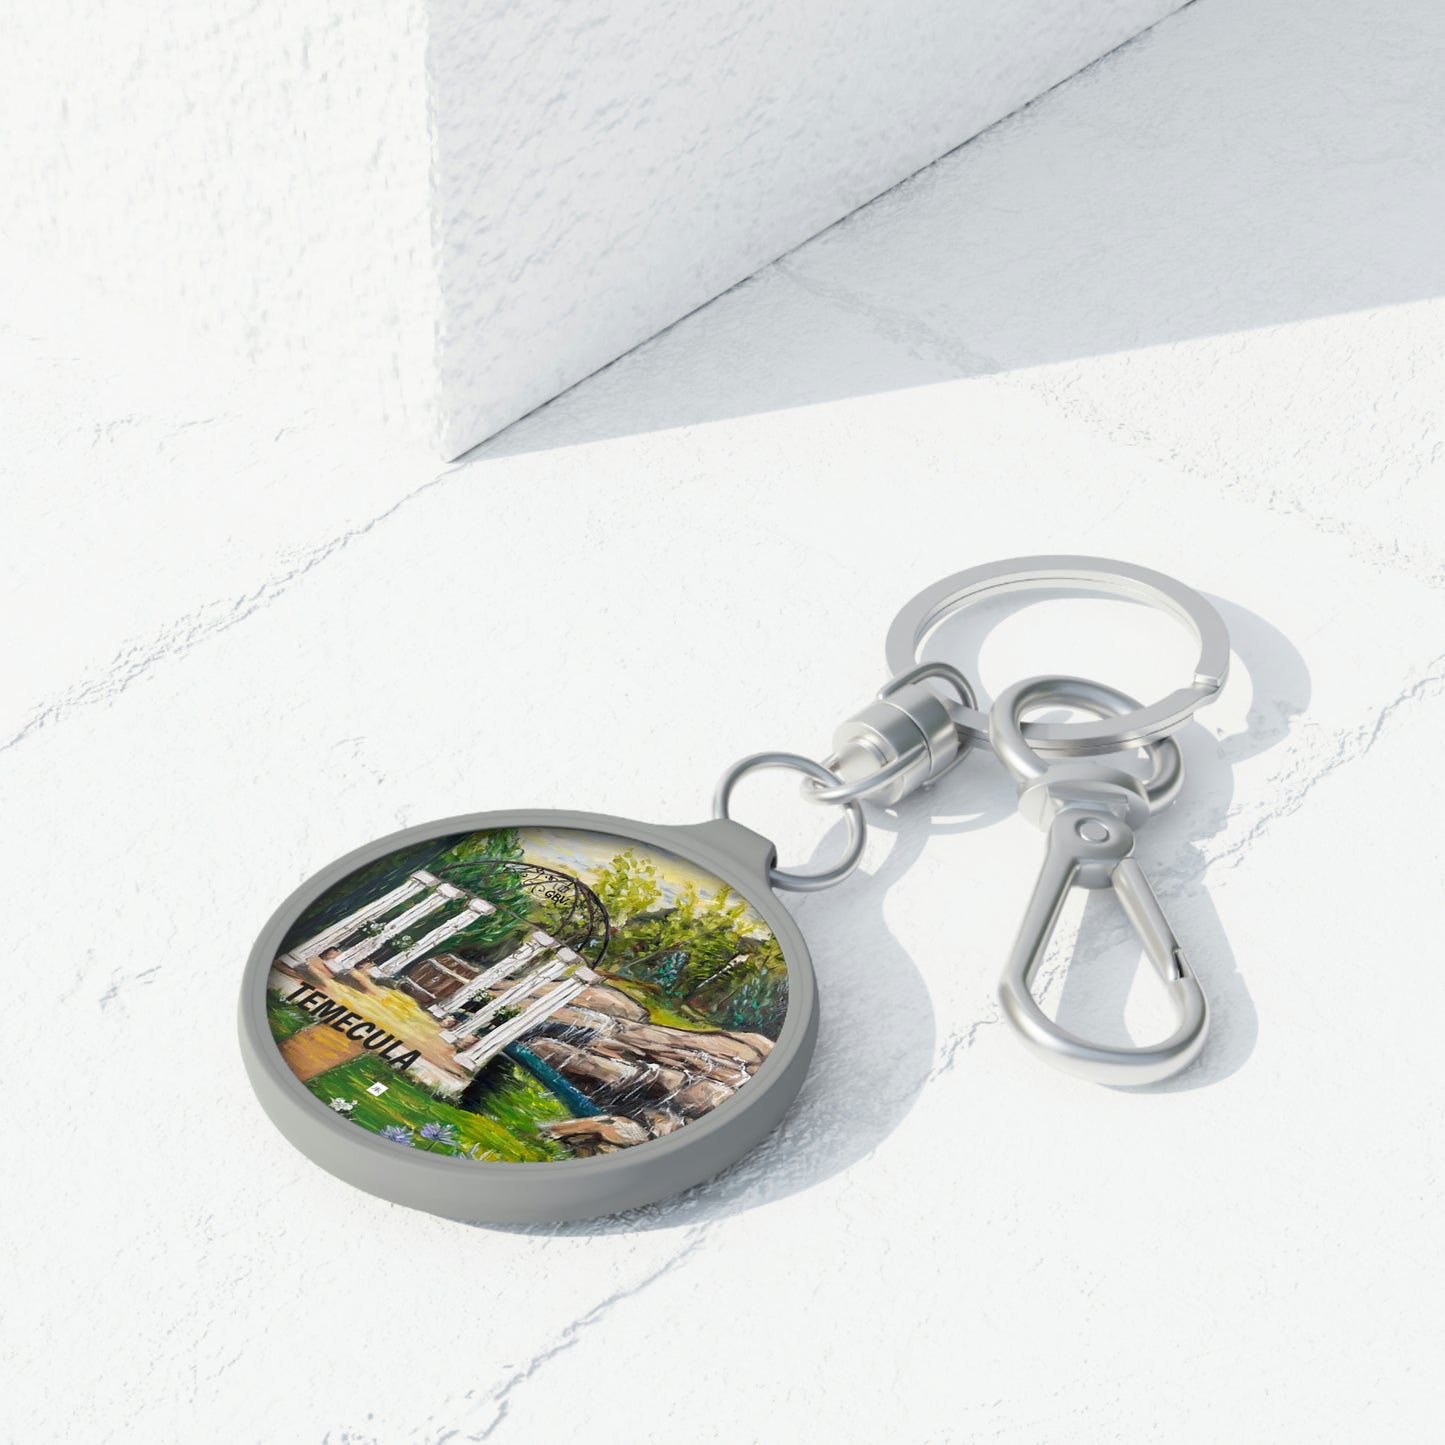 Temecula Keyring featuring "The Pergola at Gershon Bachus Vintners" Landscape Painting by Roxy Rich